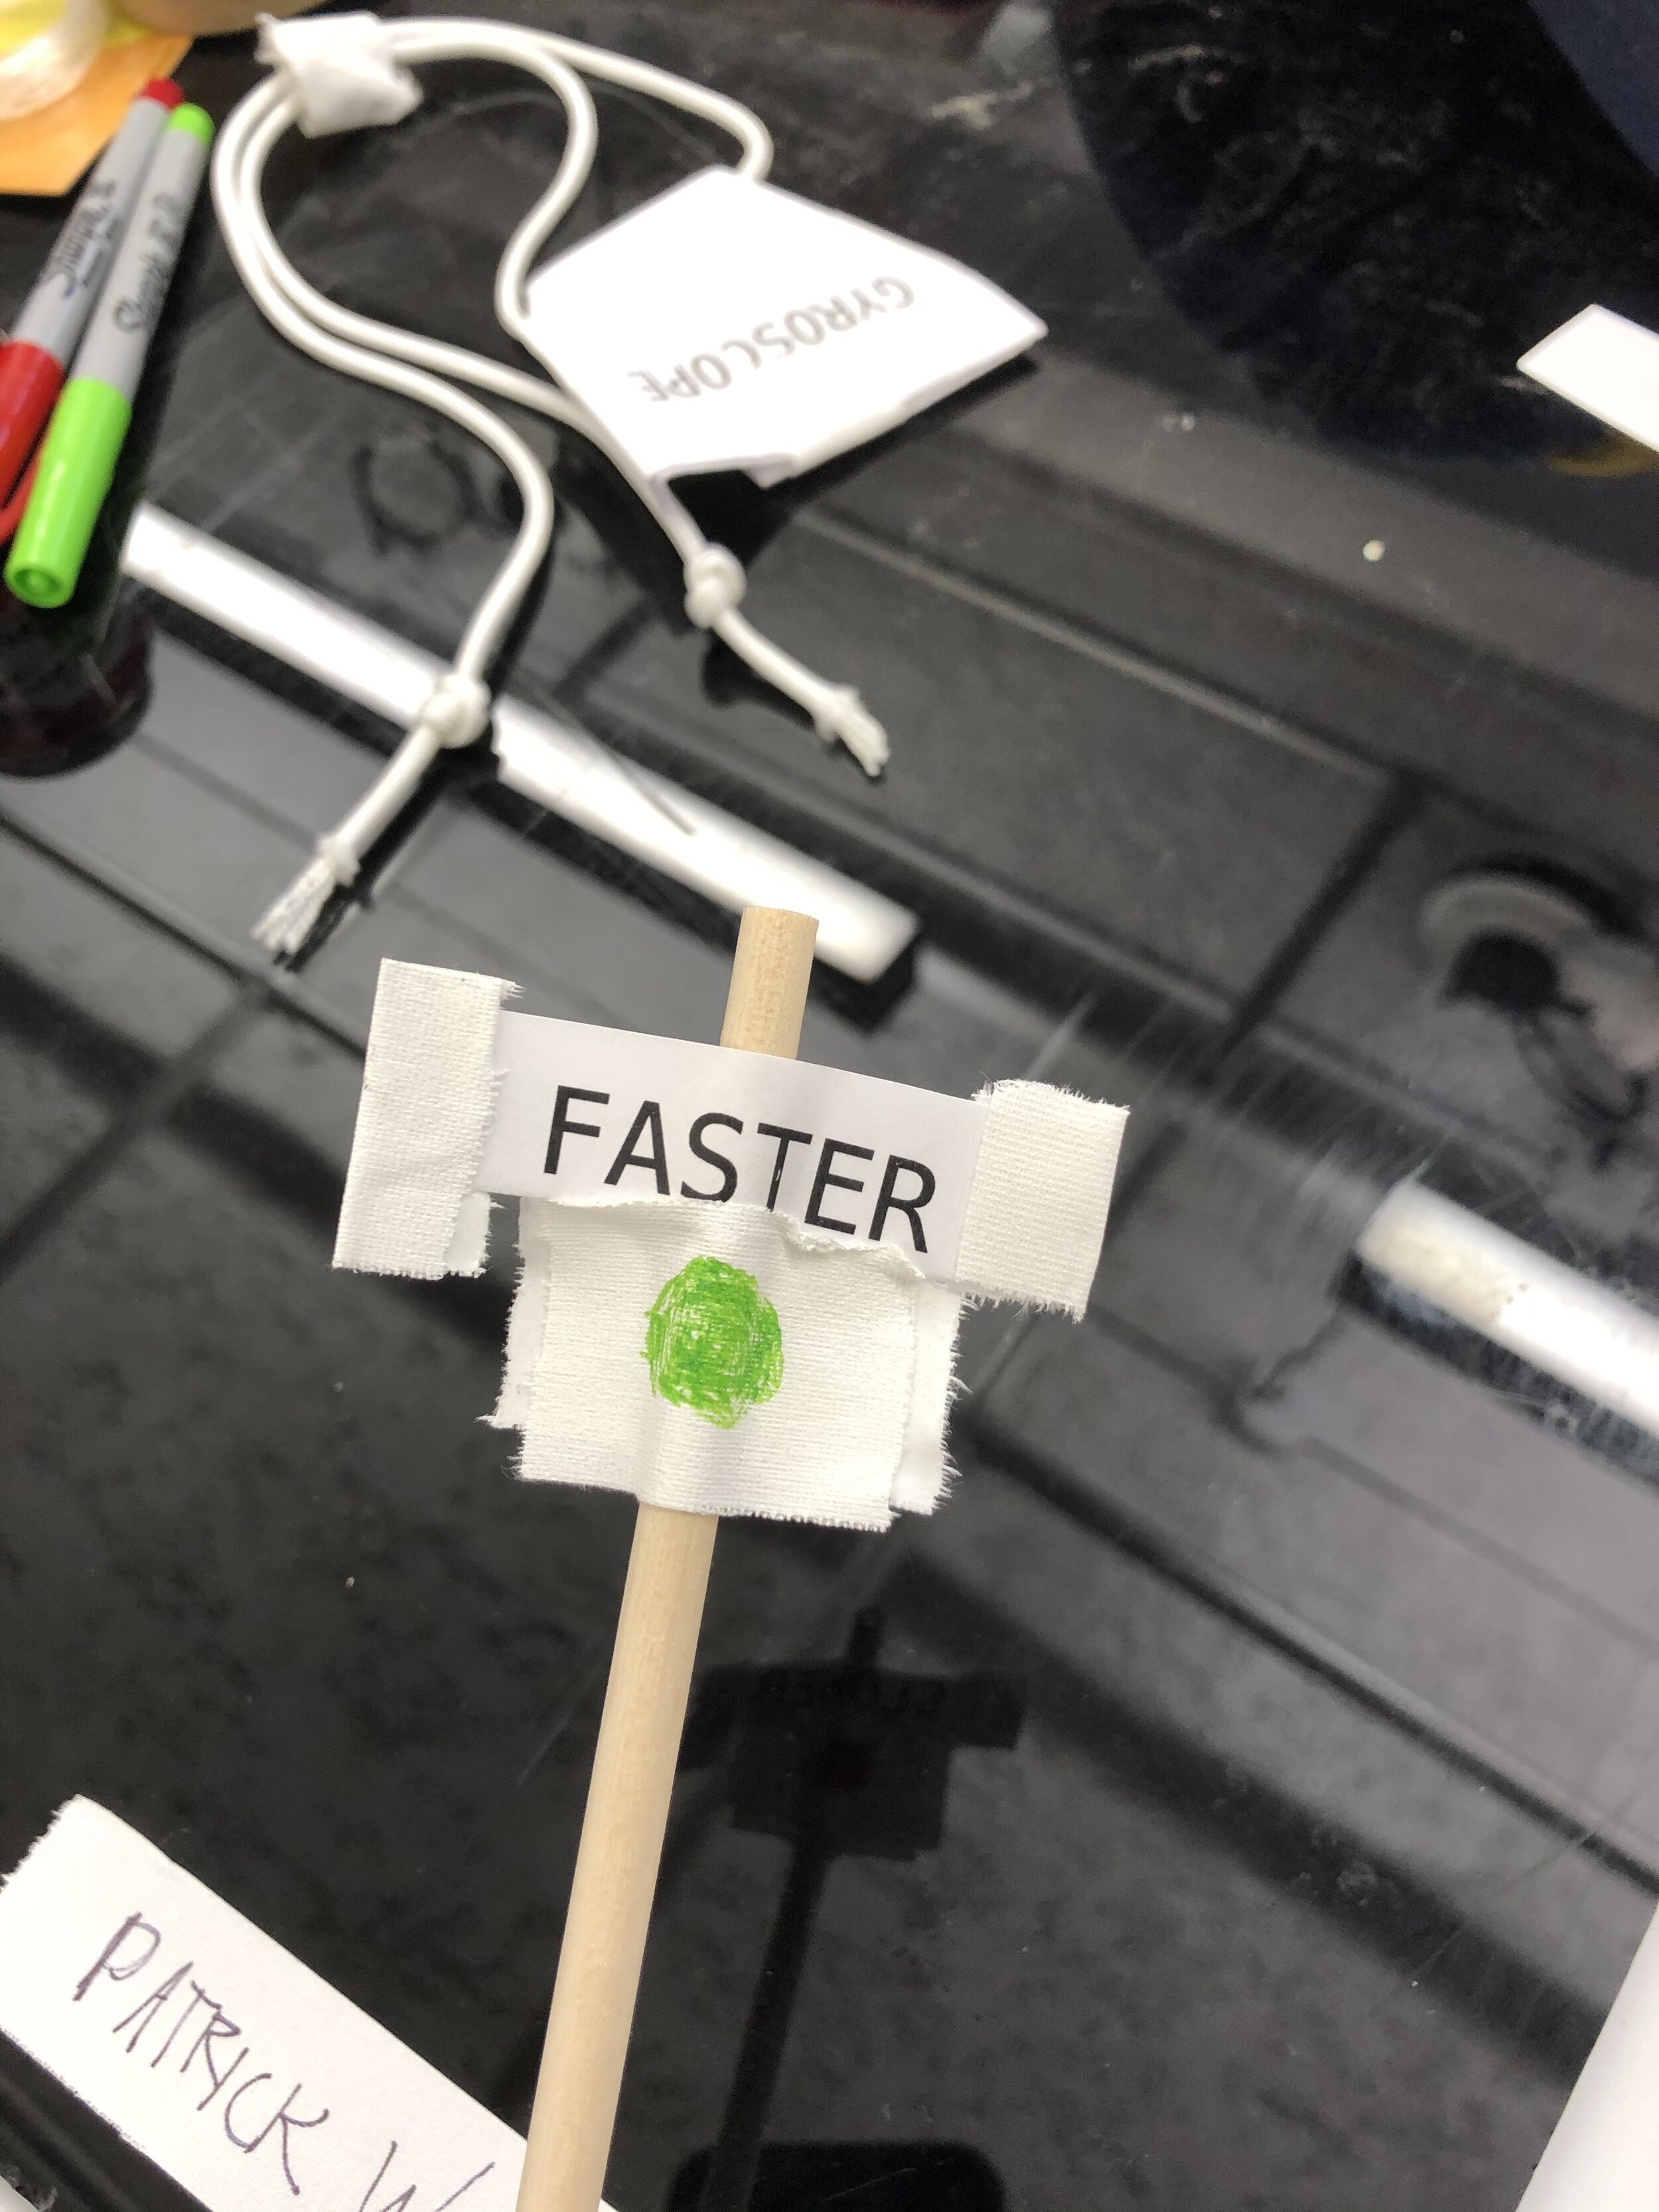 indicator showing that the player should go faster (the other side says slower with a red circle)